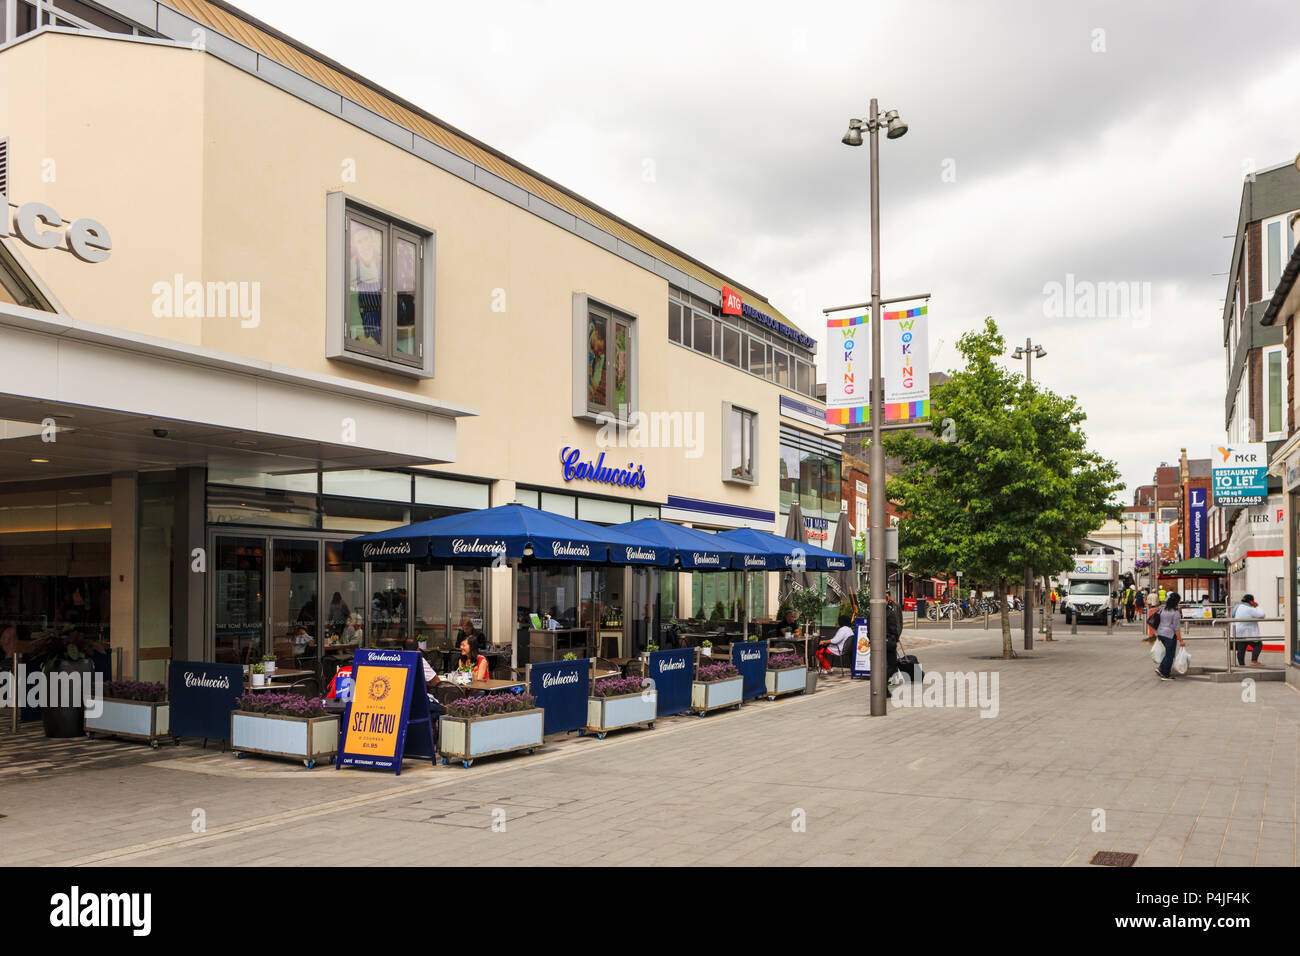 Carluccio's restaurant in Commercial Way, a pedestrianised street in the town centre of Woking, a town in Surrey, southeast England, UK Stock Photo